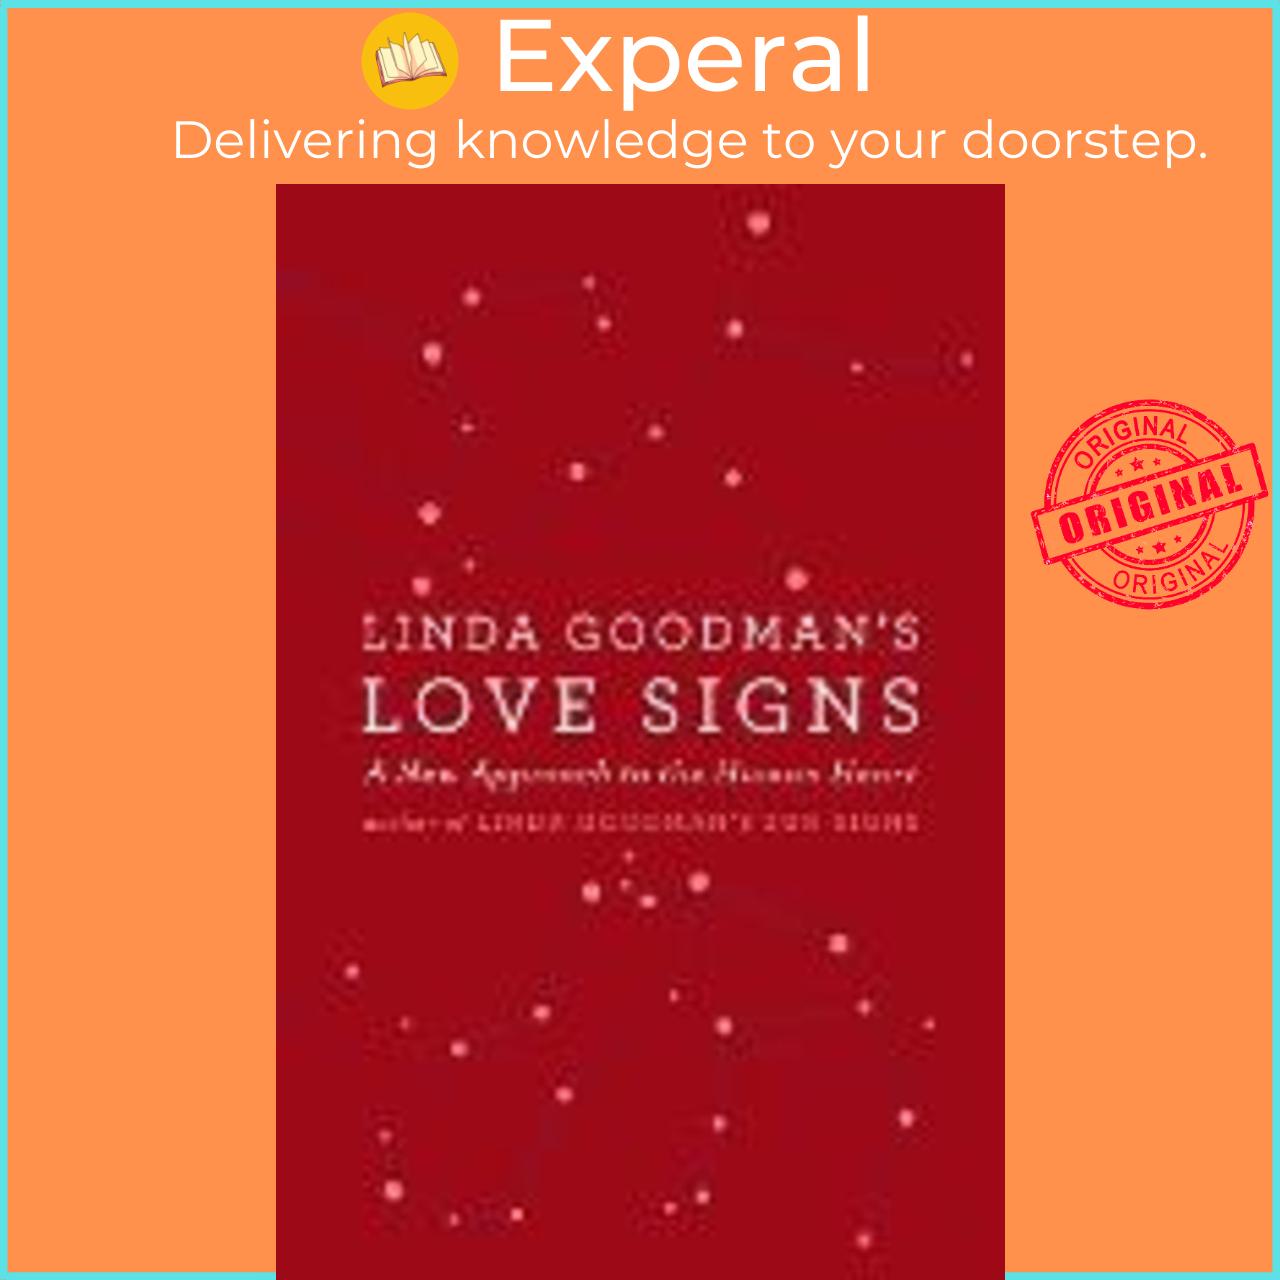 Sách - Linda Goodman's Love Signs : A New Approach to the Human Heart by Linda Goodman (US edition, paperback)